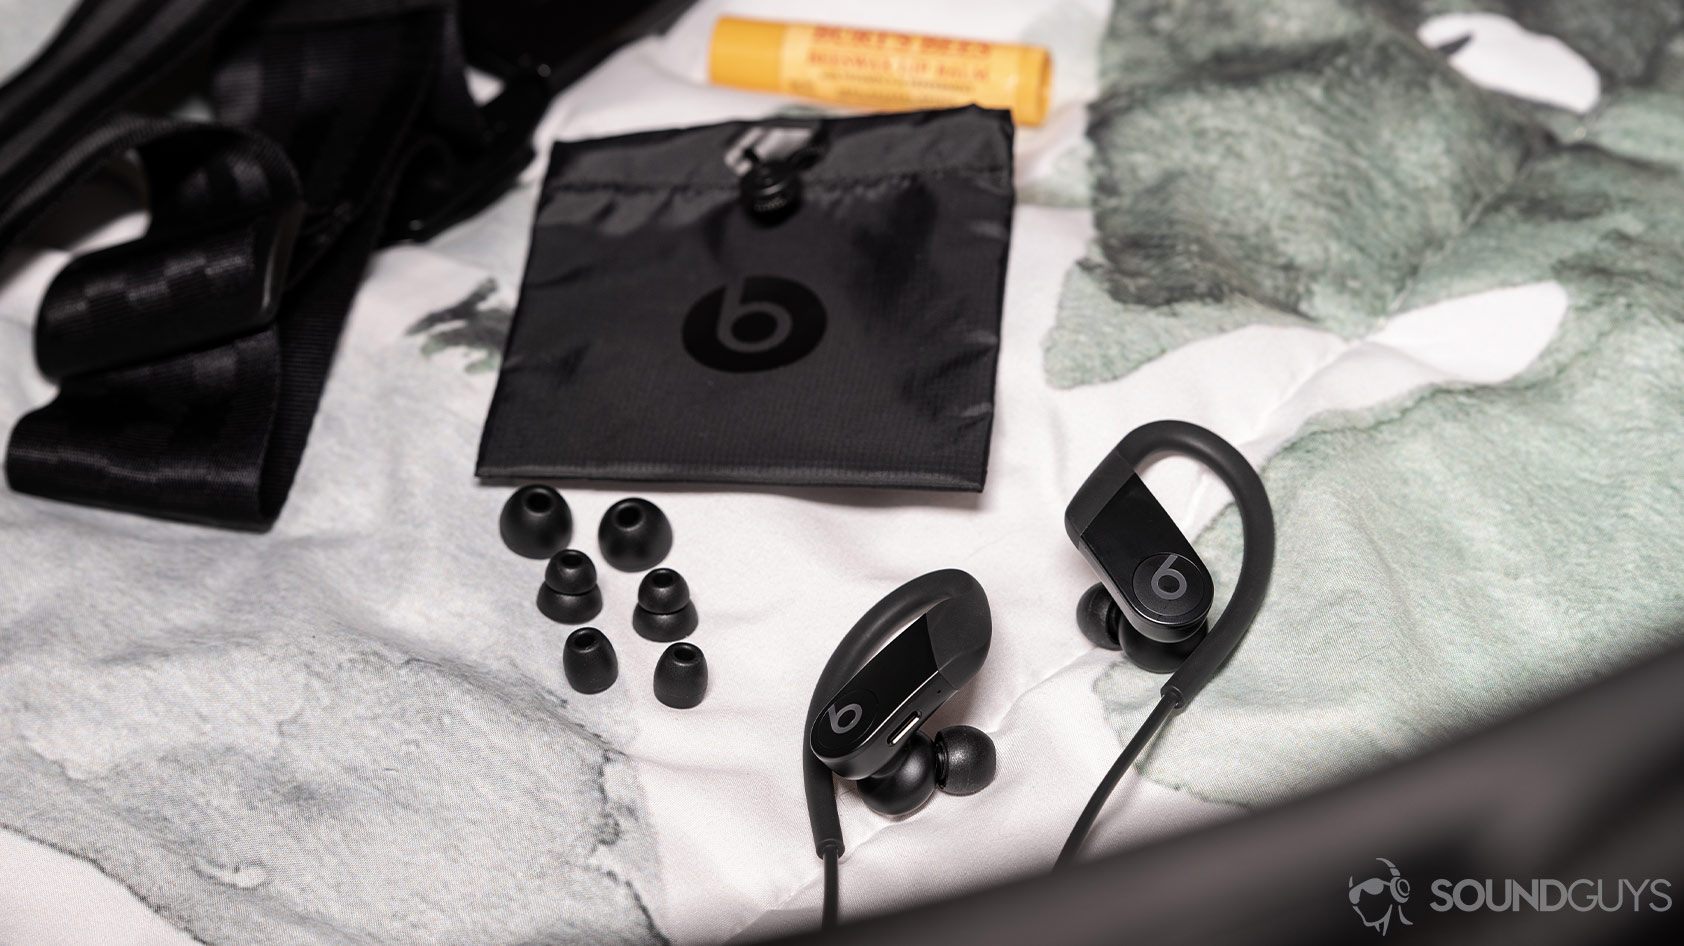 A picture of the Apple Beats Powerbeats workout earbuds, spare ear tips, and carrying pouch on a white and green comforter.